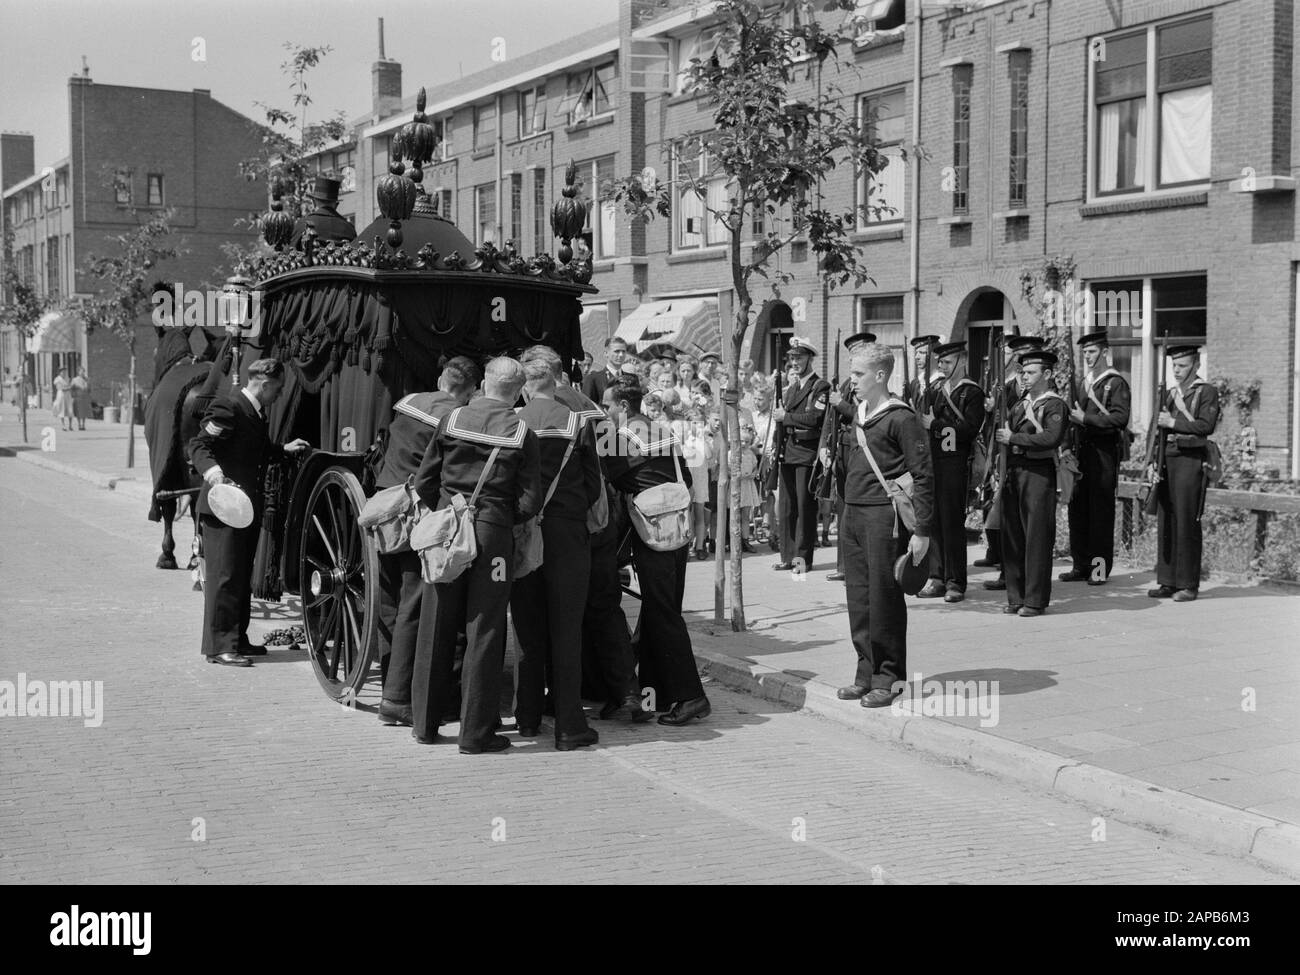 Funeral at Dordrecht sergeant aircraft telegraphist Bolleurs. Above in carriage Date: 26 July 1948 Location: Dordrecht Keywords: Funeral, Sergeants Personal name: COOTS Stock Photo